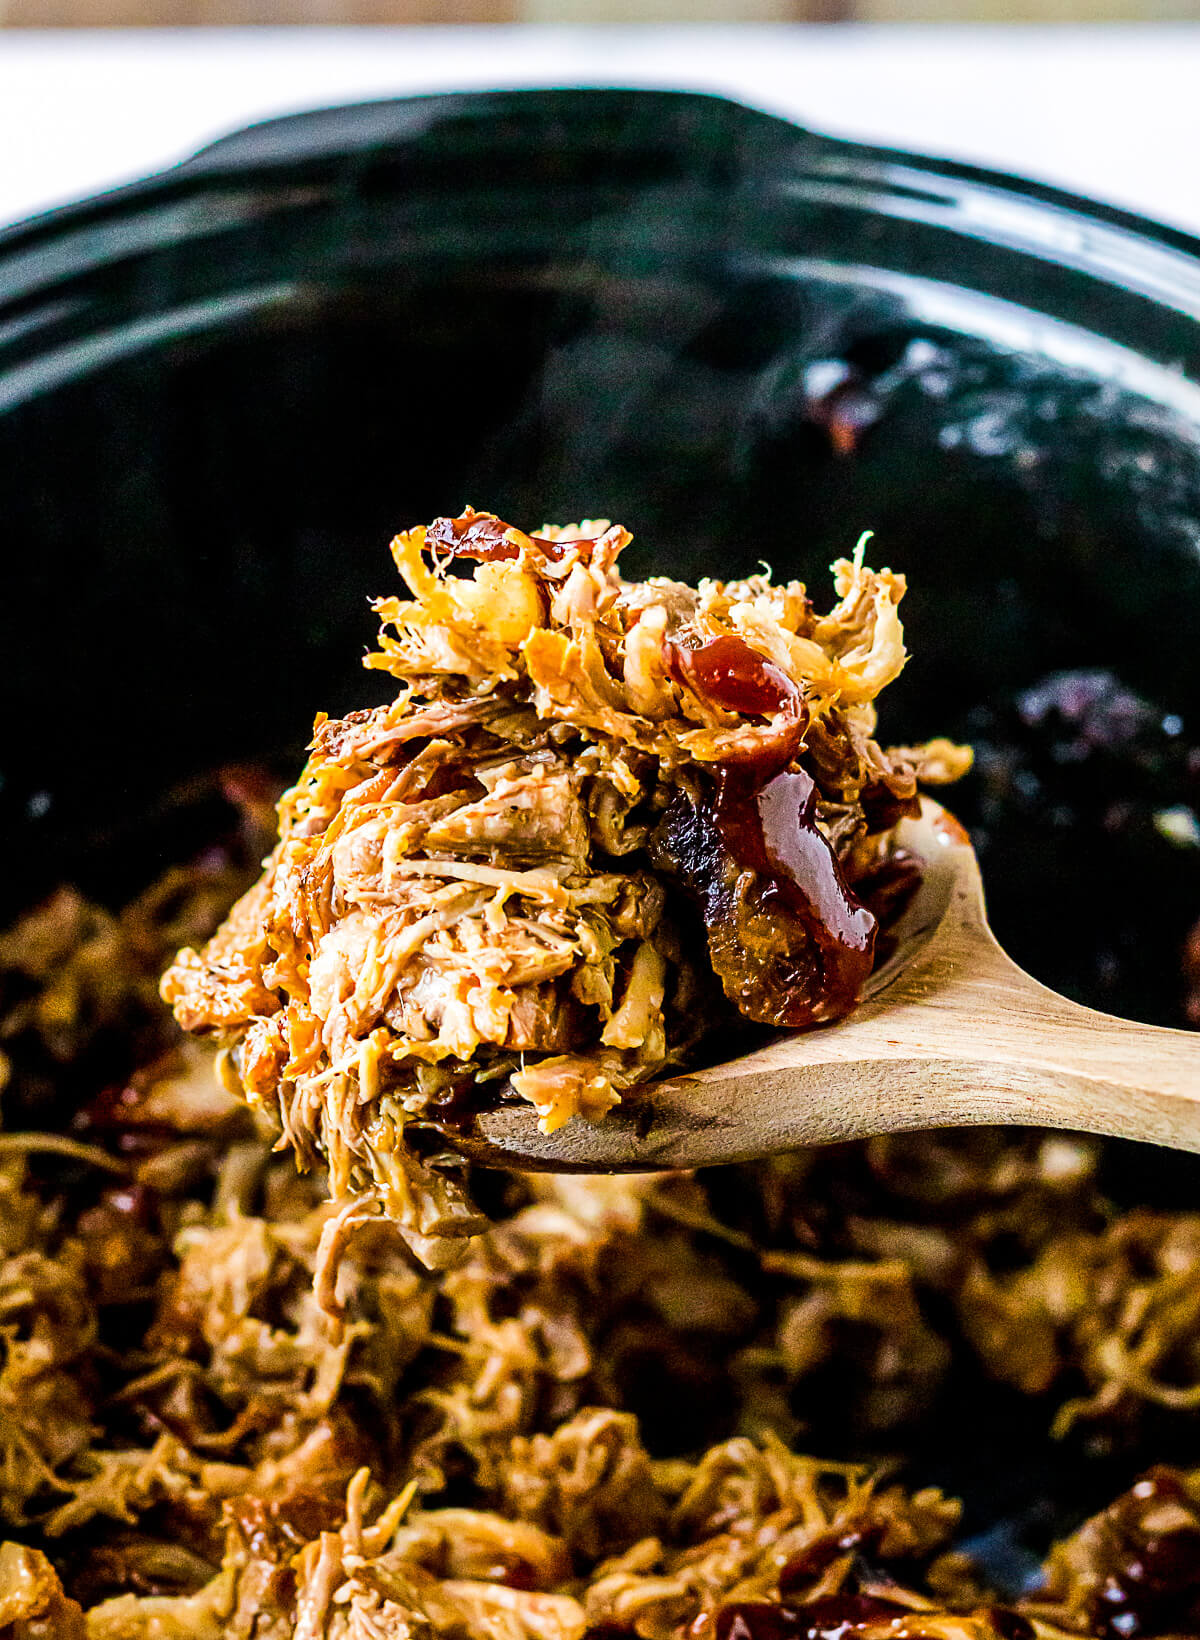 A wooden spoon holds a spoonful of shredded pork above a slow cooker filled with Root beer pulled pork.